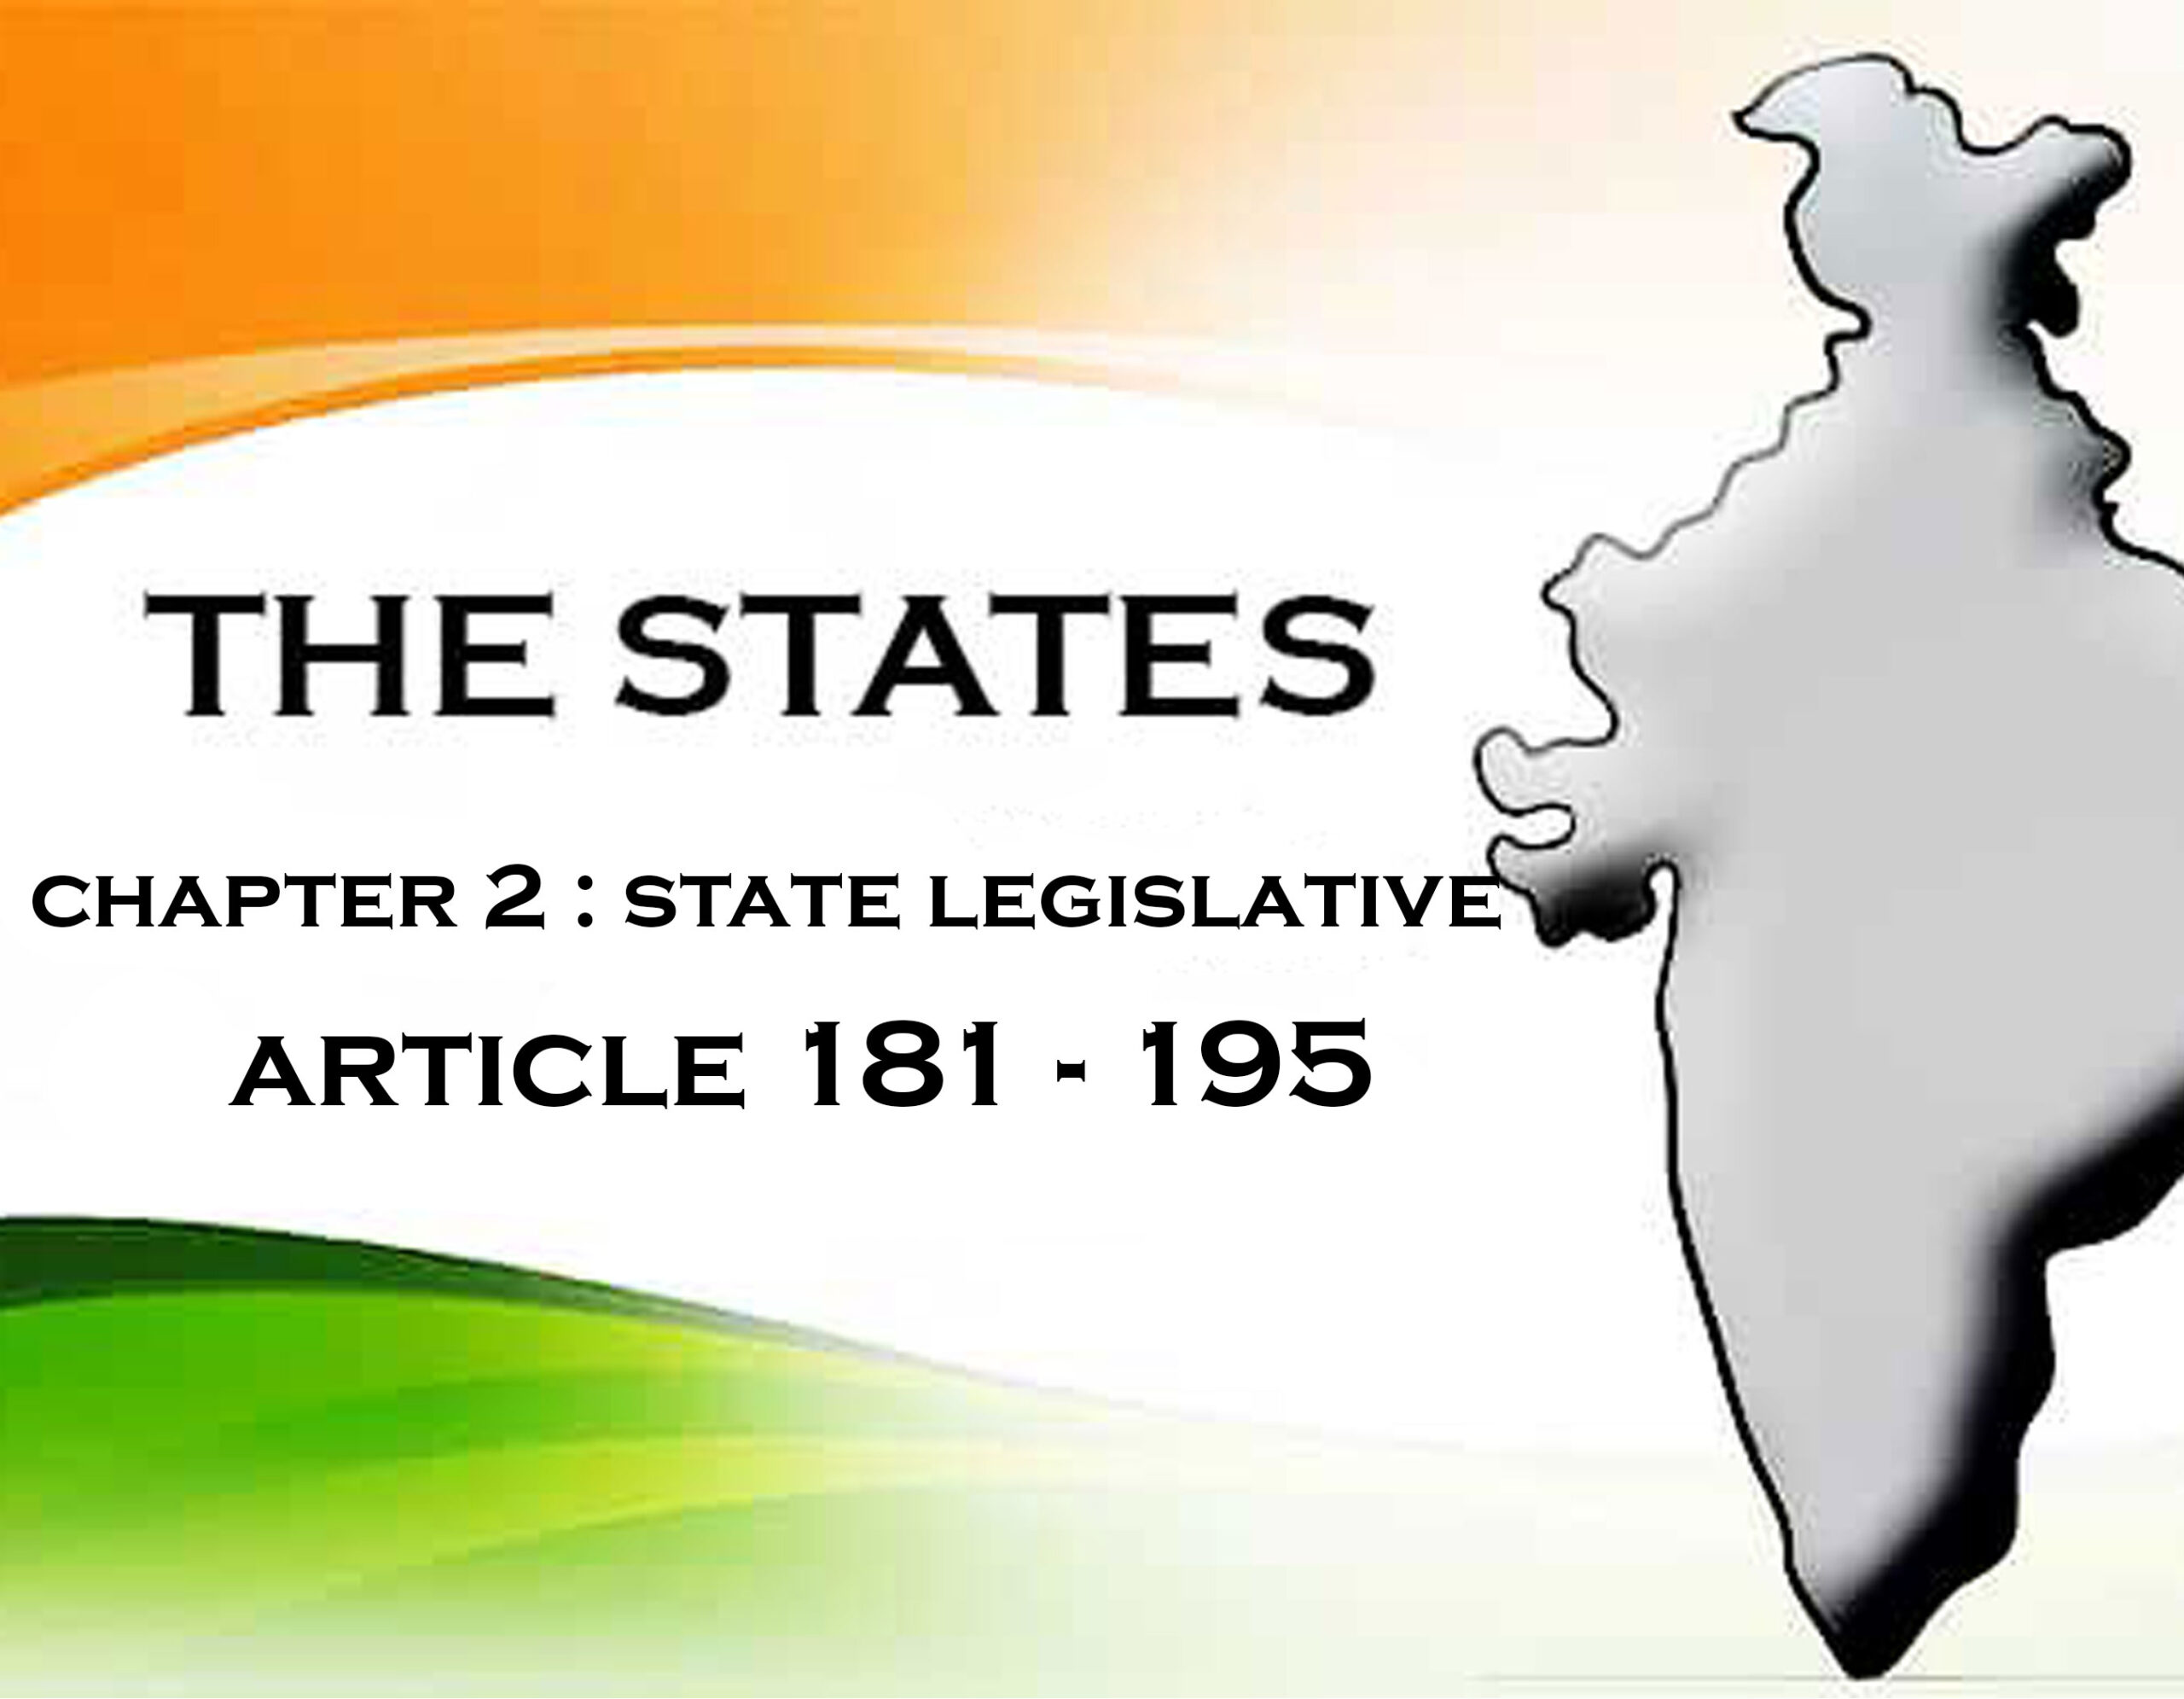 Chapter 2 : The State Legislature (Article 181-195)